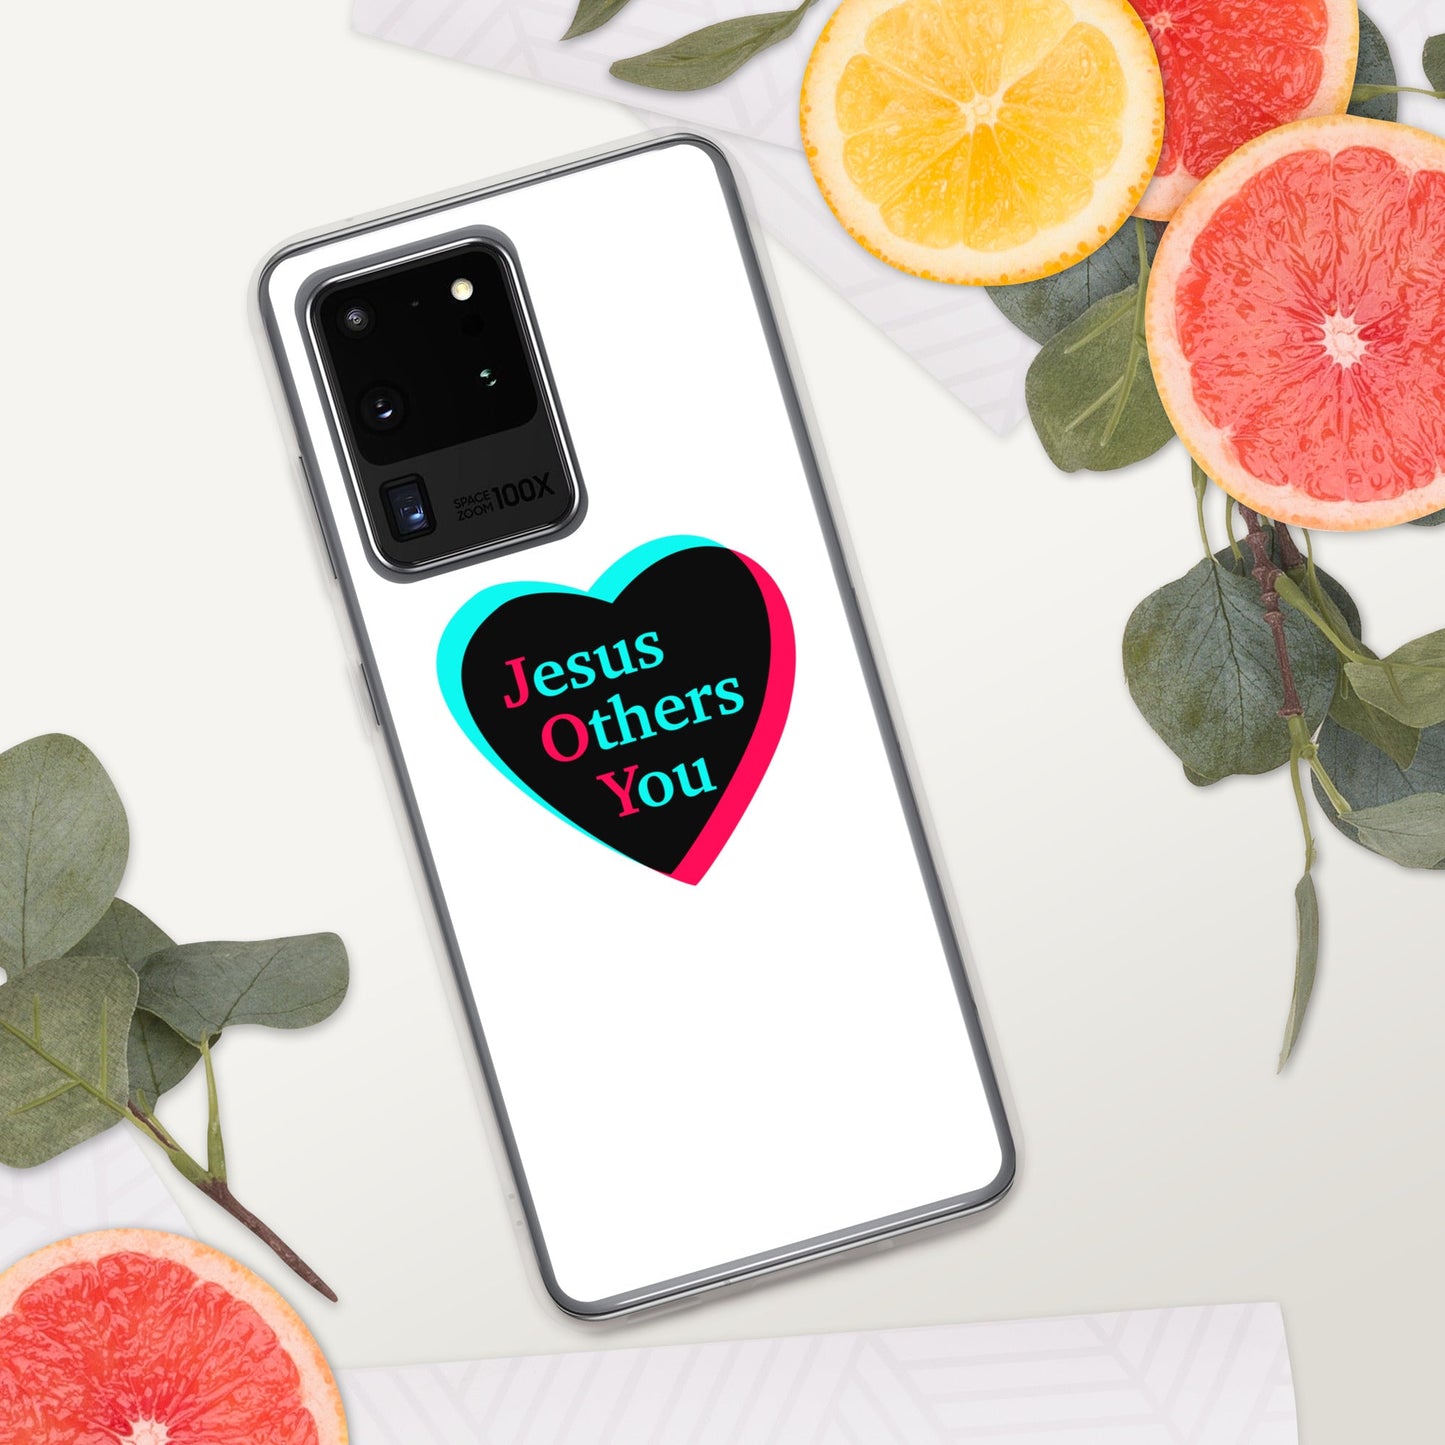 JOY = Jesus Others You - Samsung Case for Galaxy S10, S10+, S10e, S20, S20 FE, S20 Plus, S20 Ultra, S21, S21 Plus, S21 Ultra, S21 - Creation Awaits